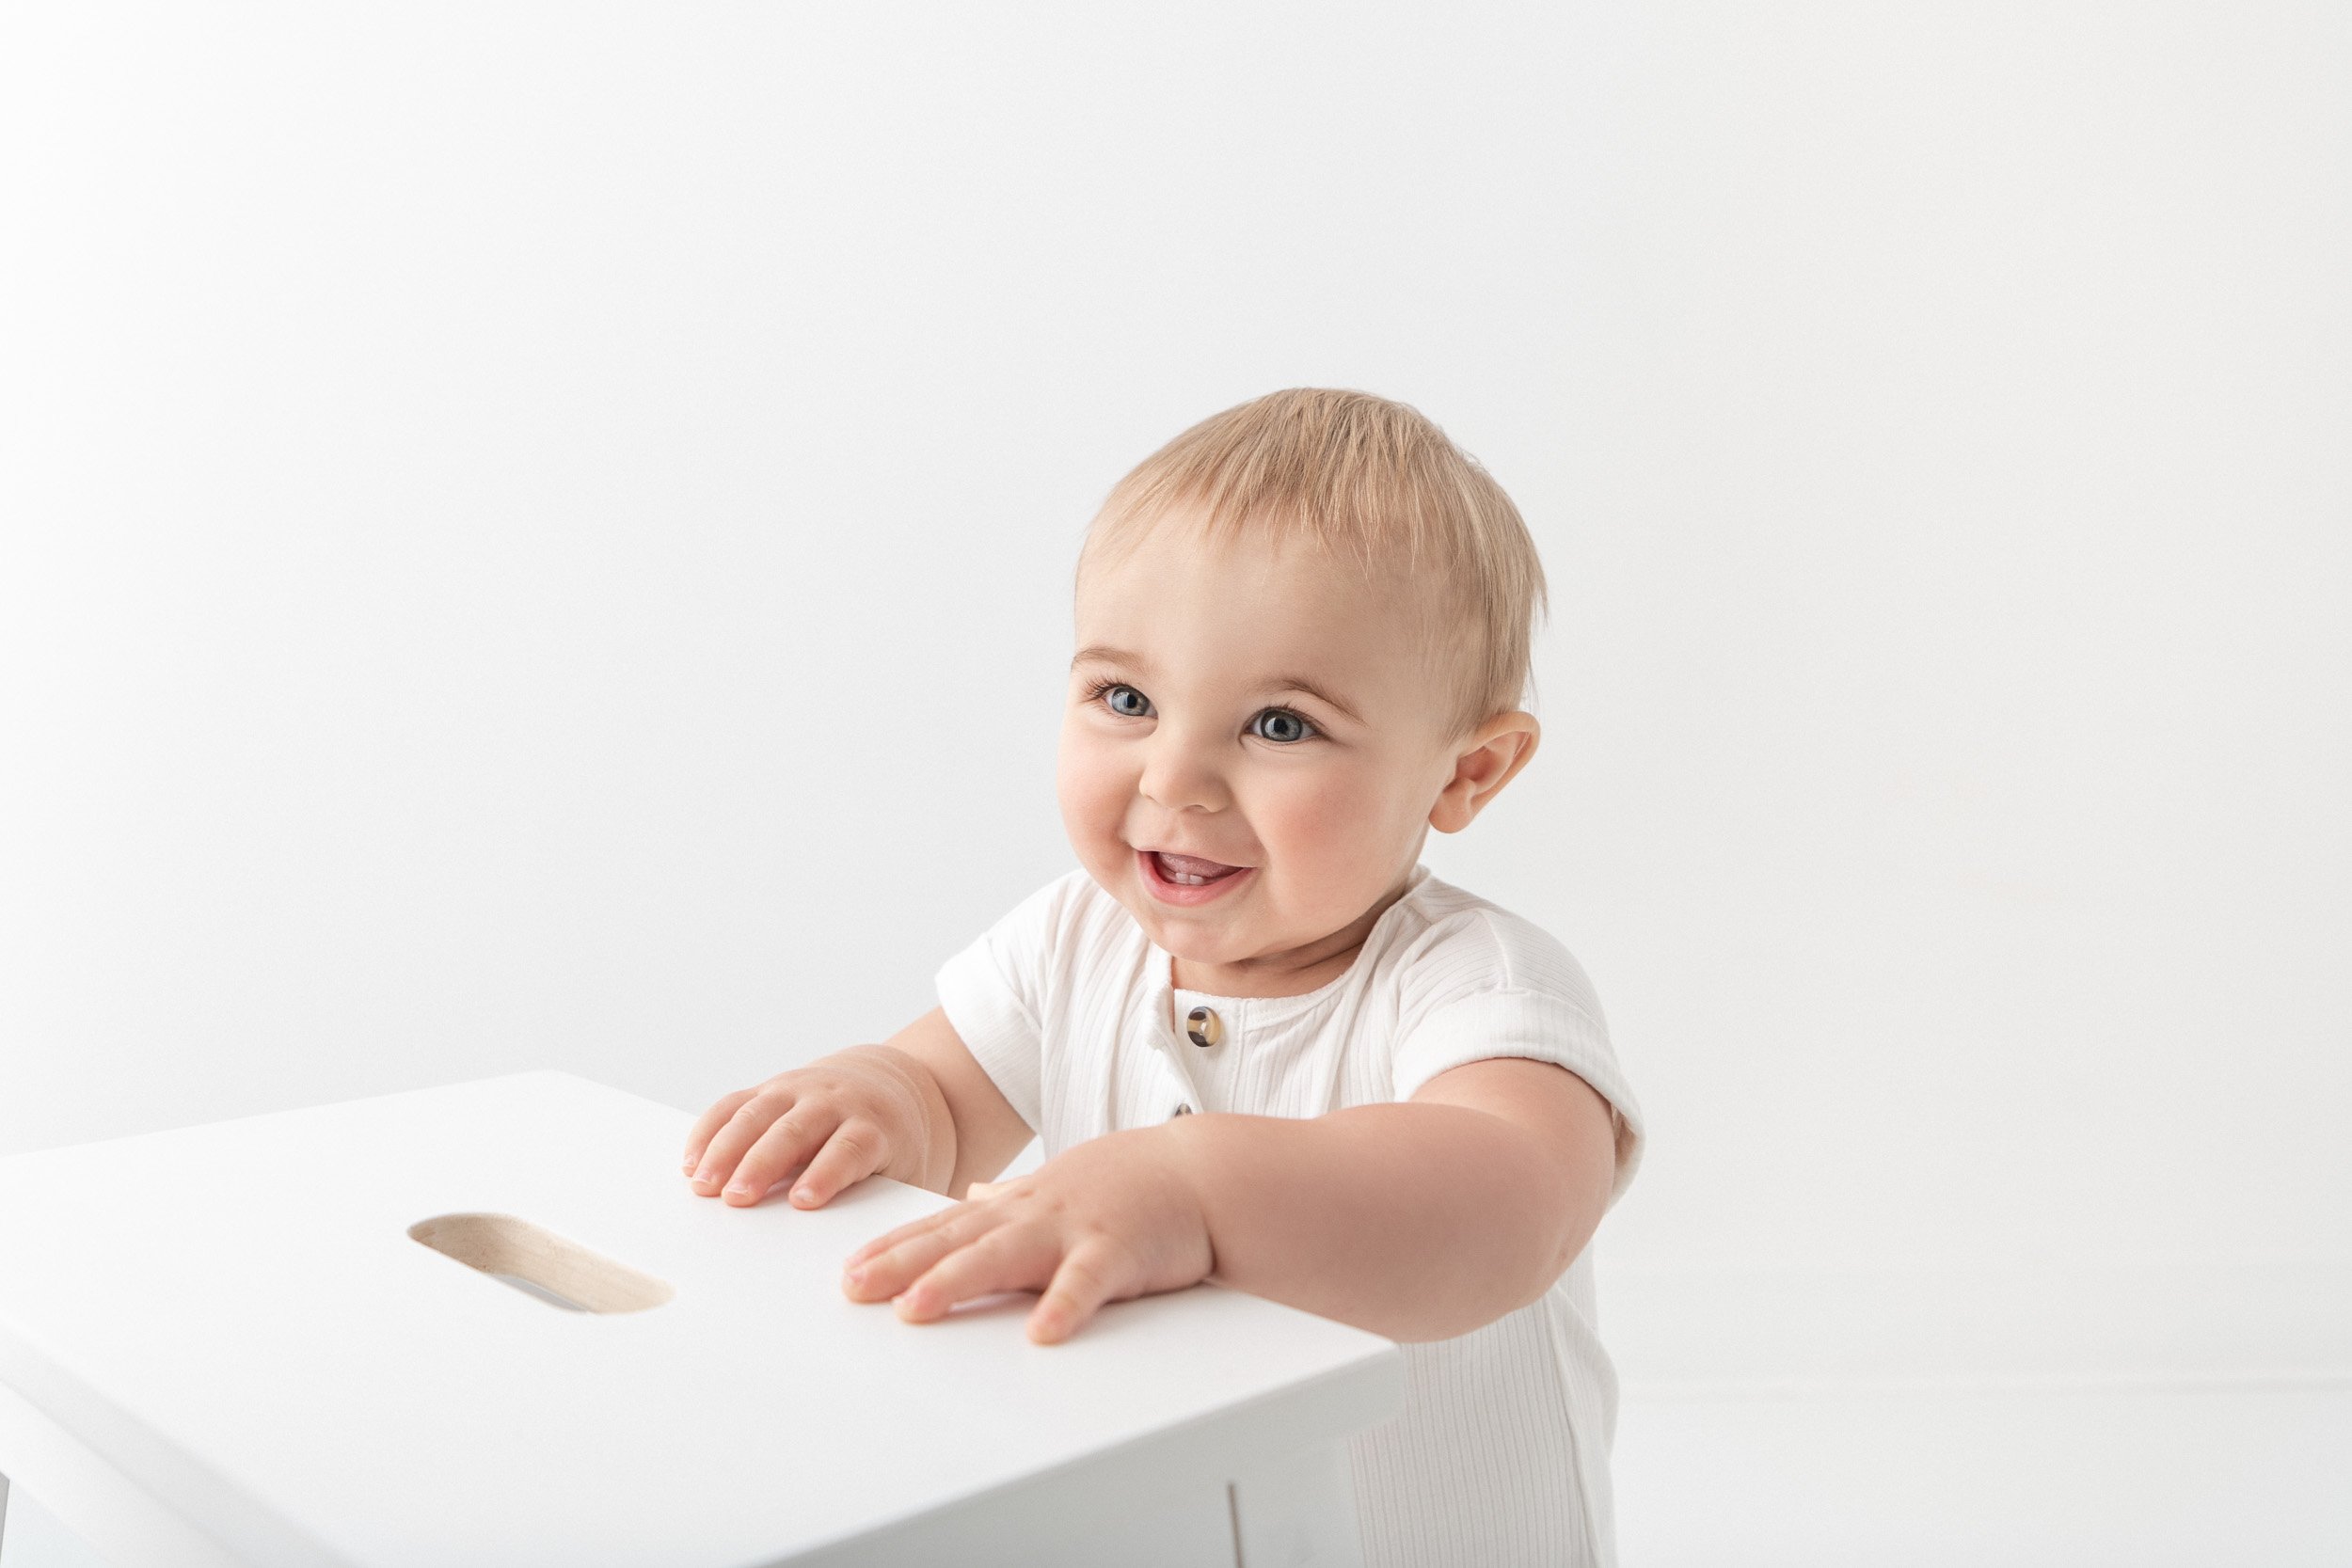  During a birthday photography session, a baby plays on a table by Nicole Hawkins Photography. action baby shots bday #NicoleHawkinsPhotography #NicoleHawkinsBabies #BirthdayStudioPhotography #smashcake #firstbirthday #studiobabiesandchildren 